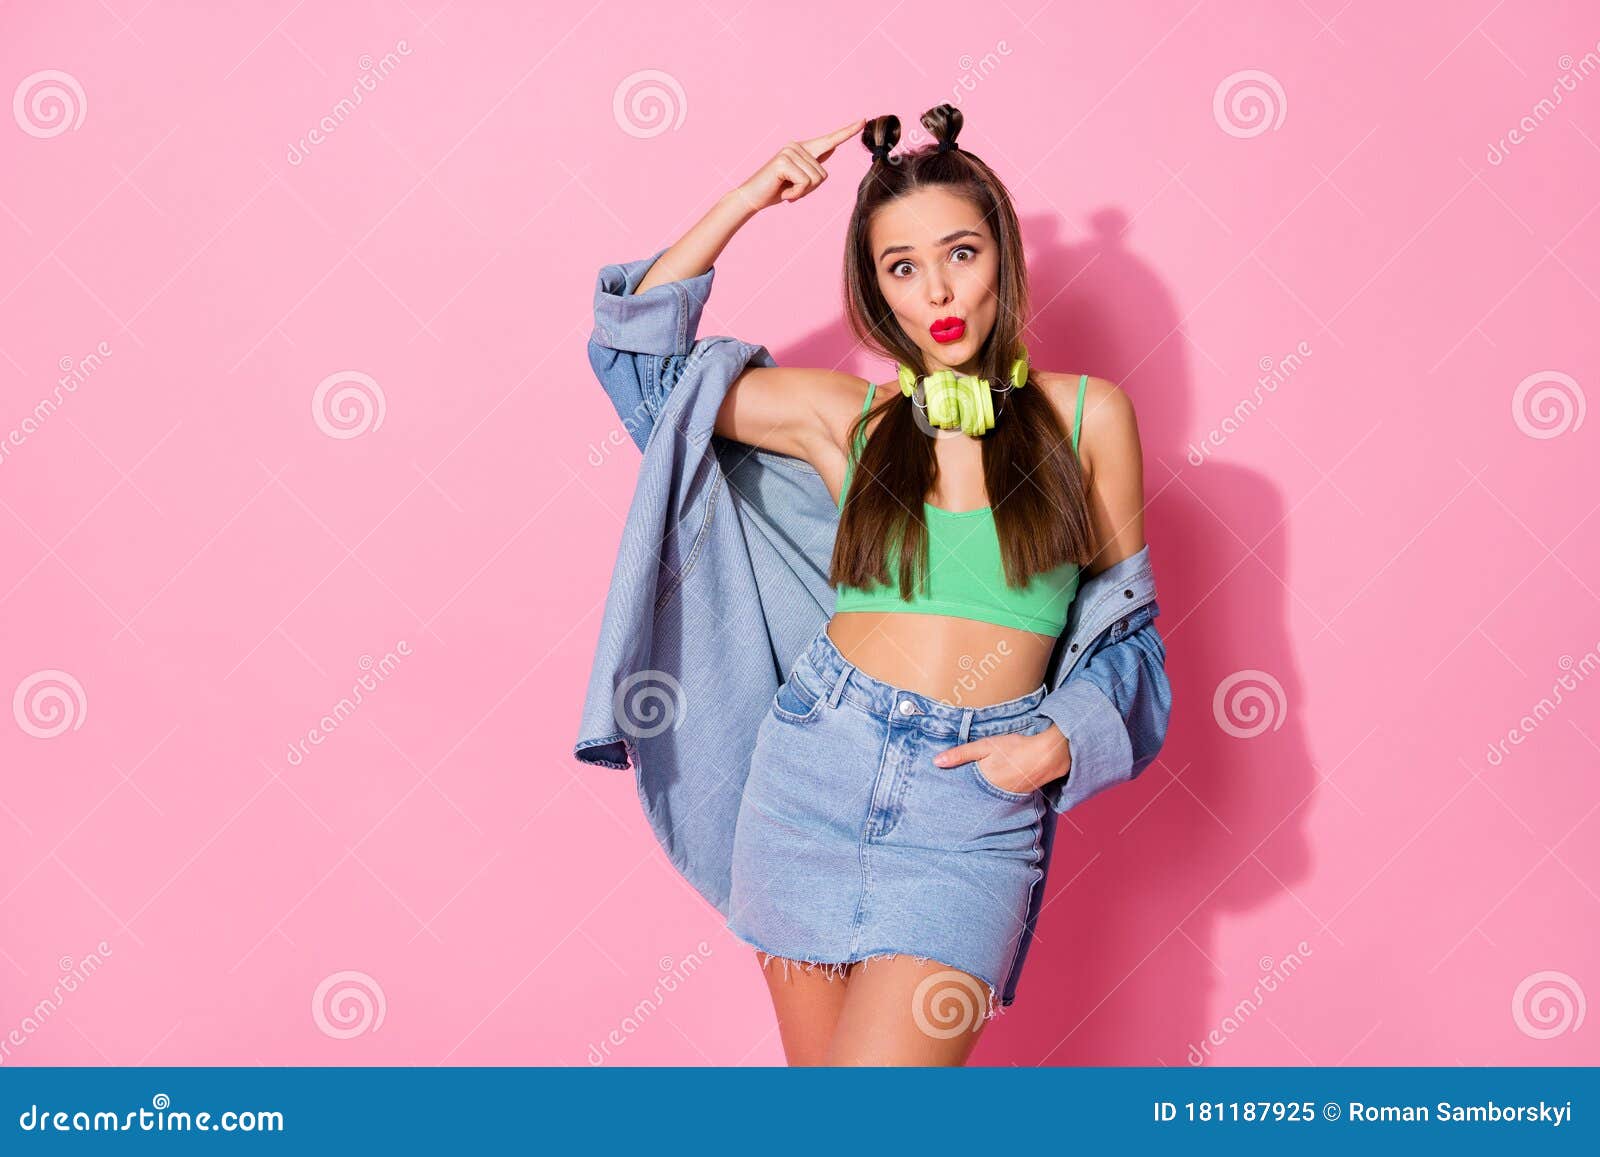 Photo of Millennial Pretty Lady Direct Finger Head Showing Modern Cool  Hairdo Two Buns Wear Denim Jacket Green Crop Top Stock Image - Image of  hairdress, millennial: 181187925